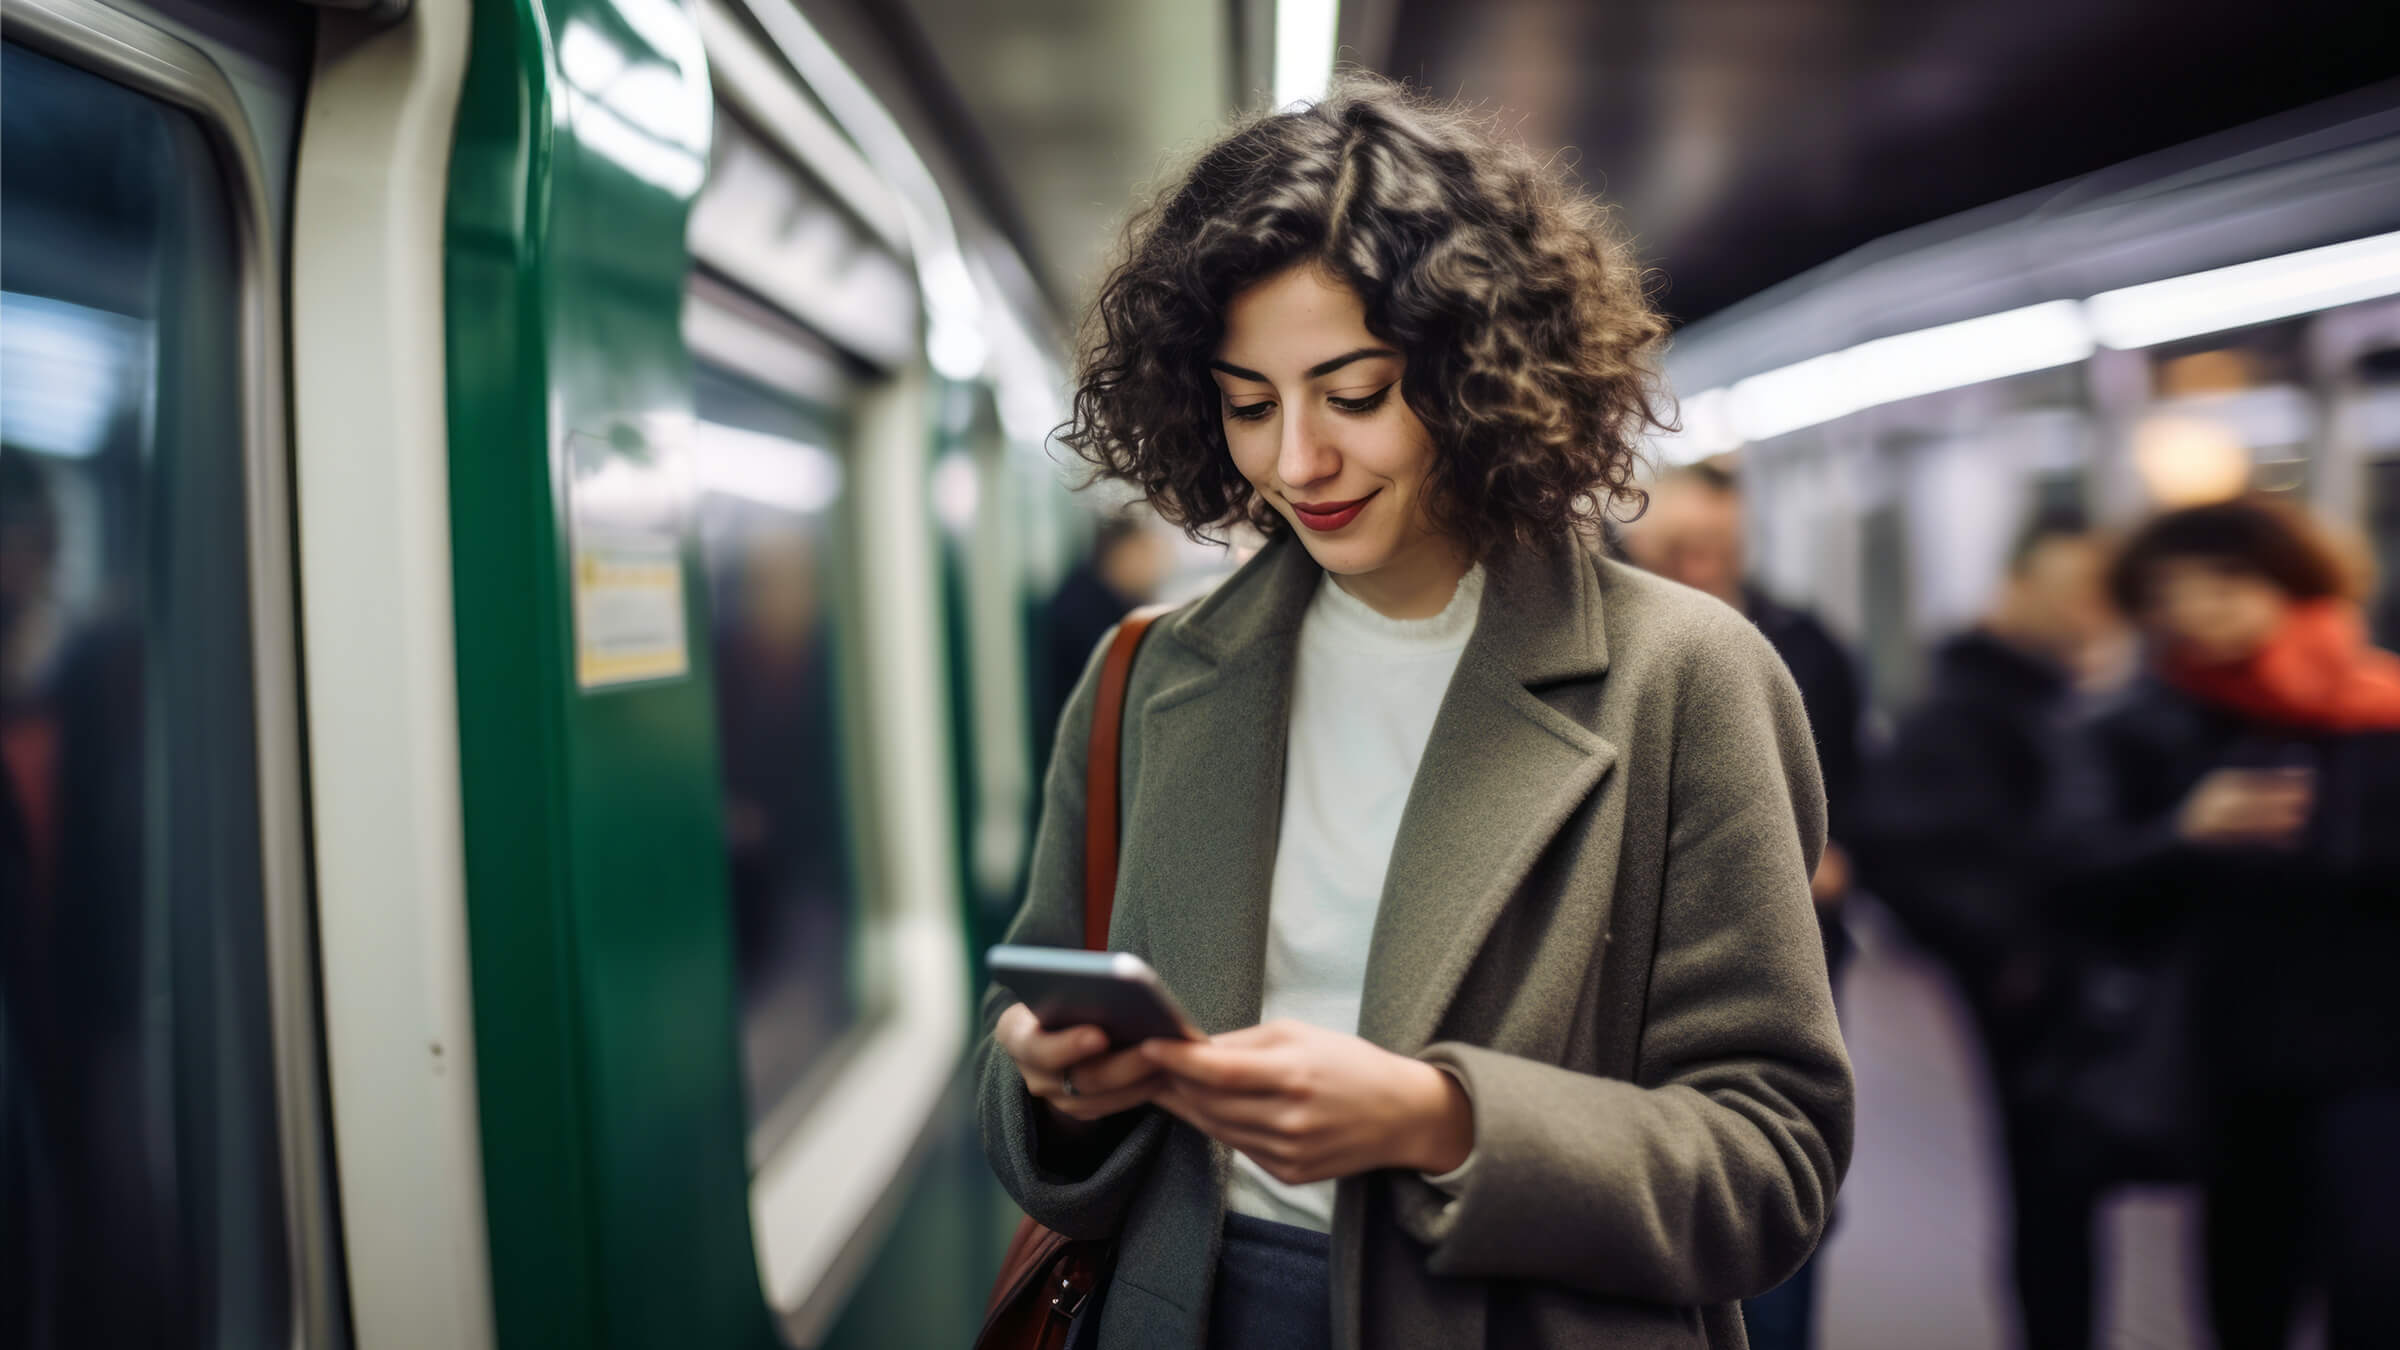 Young woman on smartphone, Train